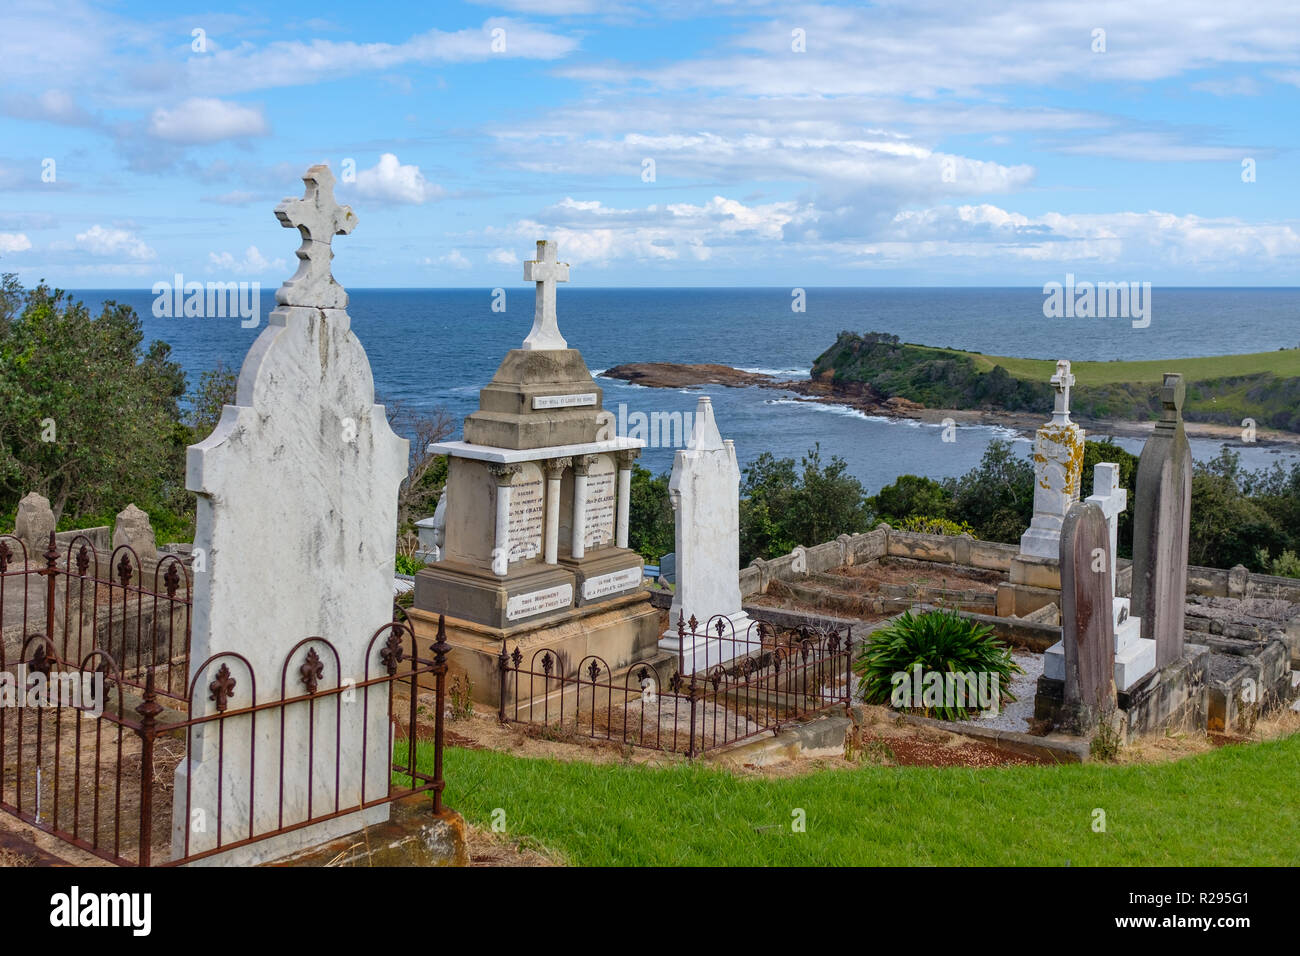 Headstones and railing at peaceful historic Gerringong Cemetery, with beautiful views out across the sea, Gerringong, NSW, Australia Stock Photo